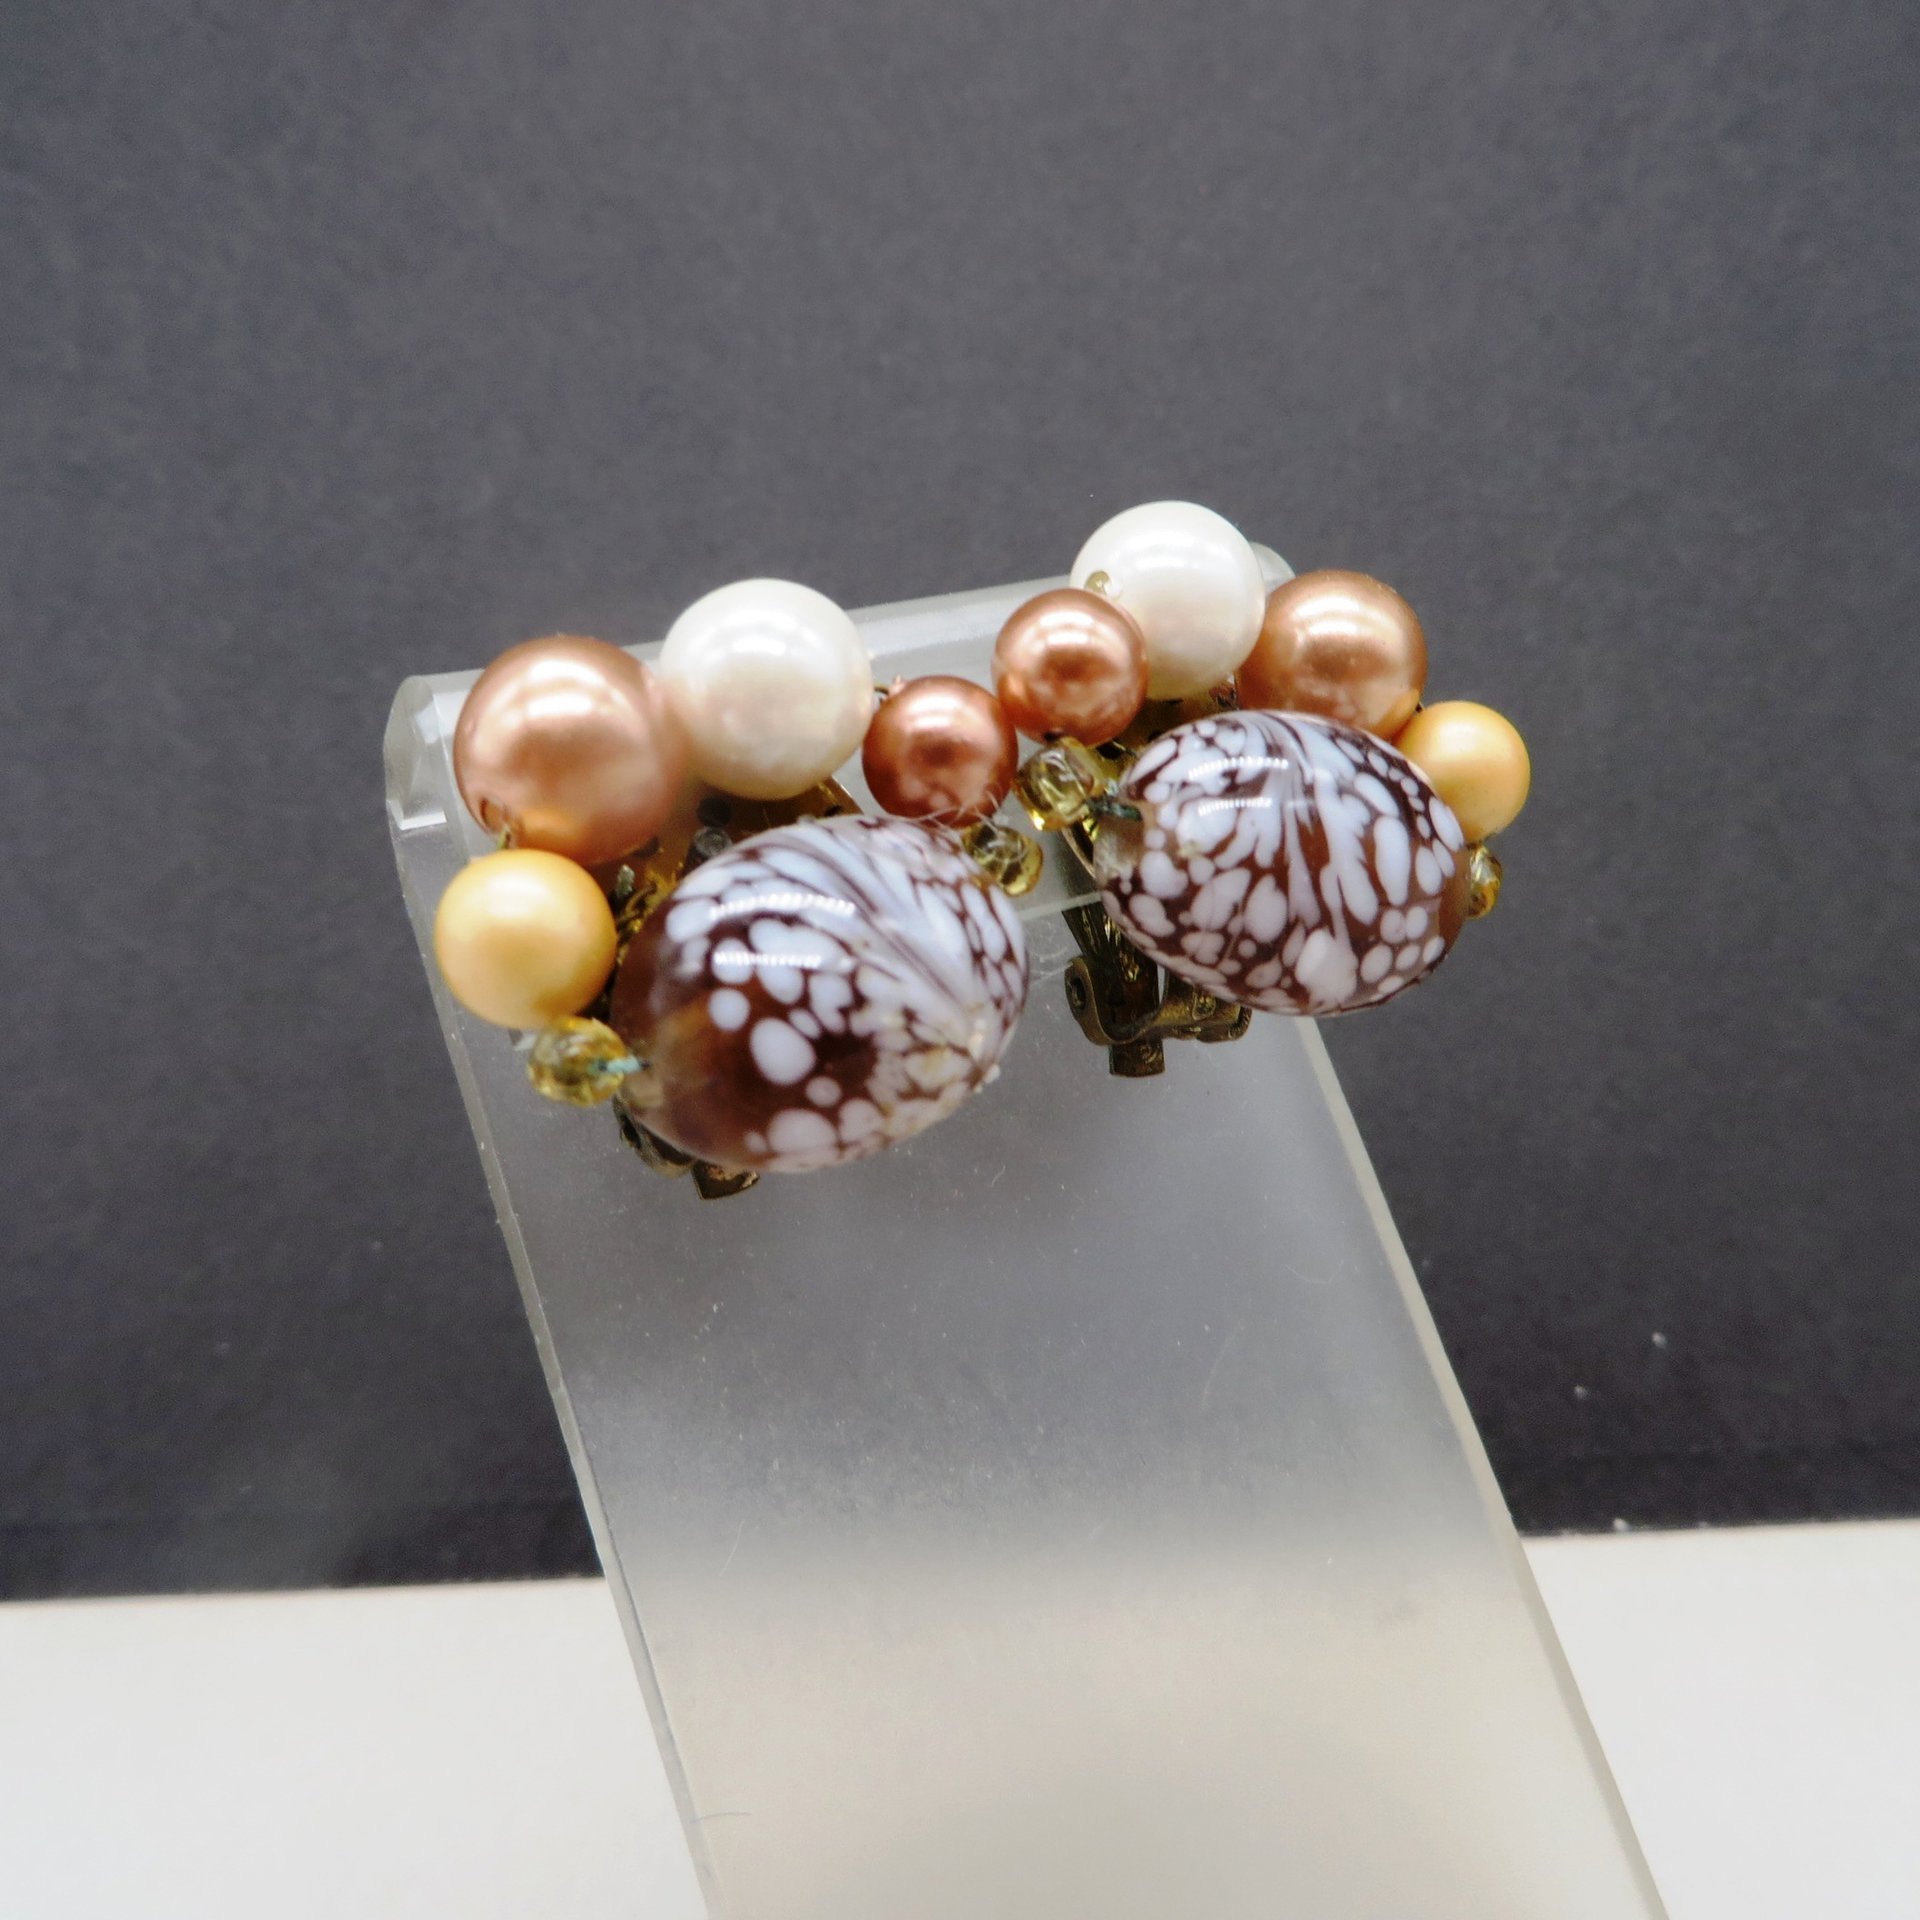 1960's Multi-Color Beaded Earrings  in Mottled Wine, Copper, Yellow and White, Vintage Japan Jewelry